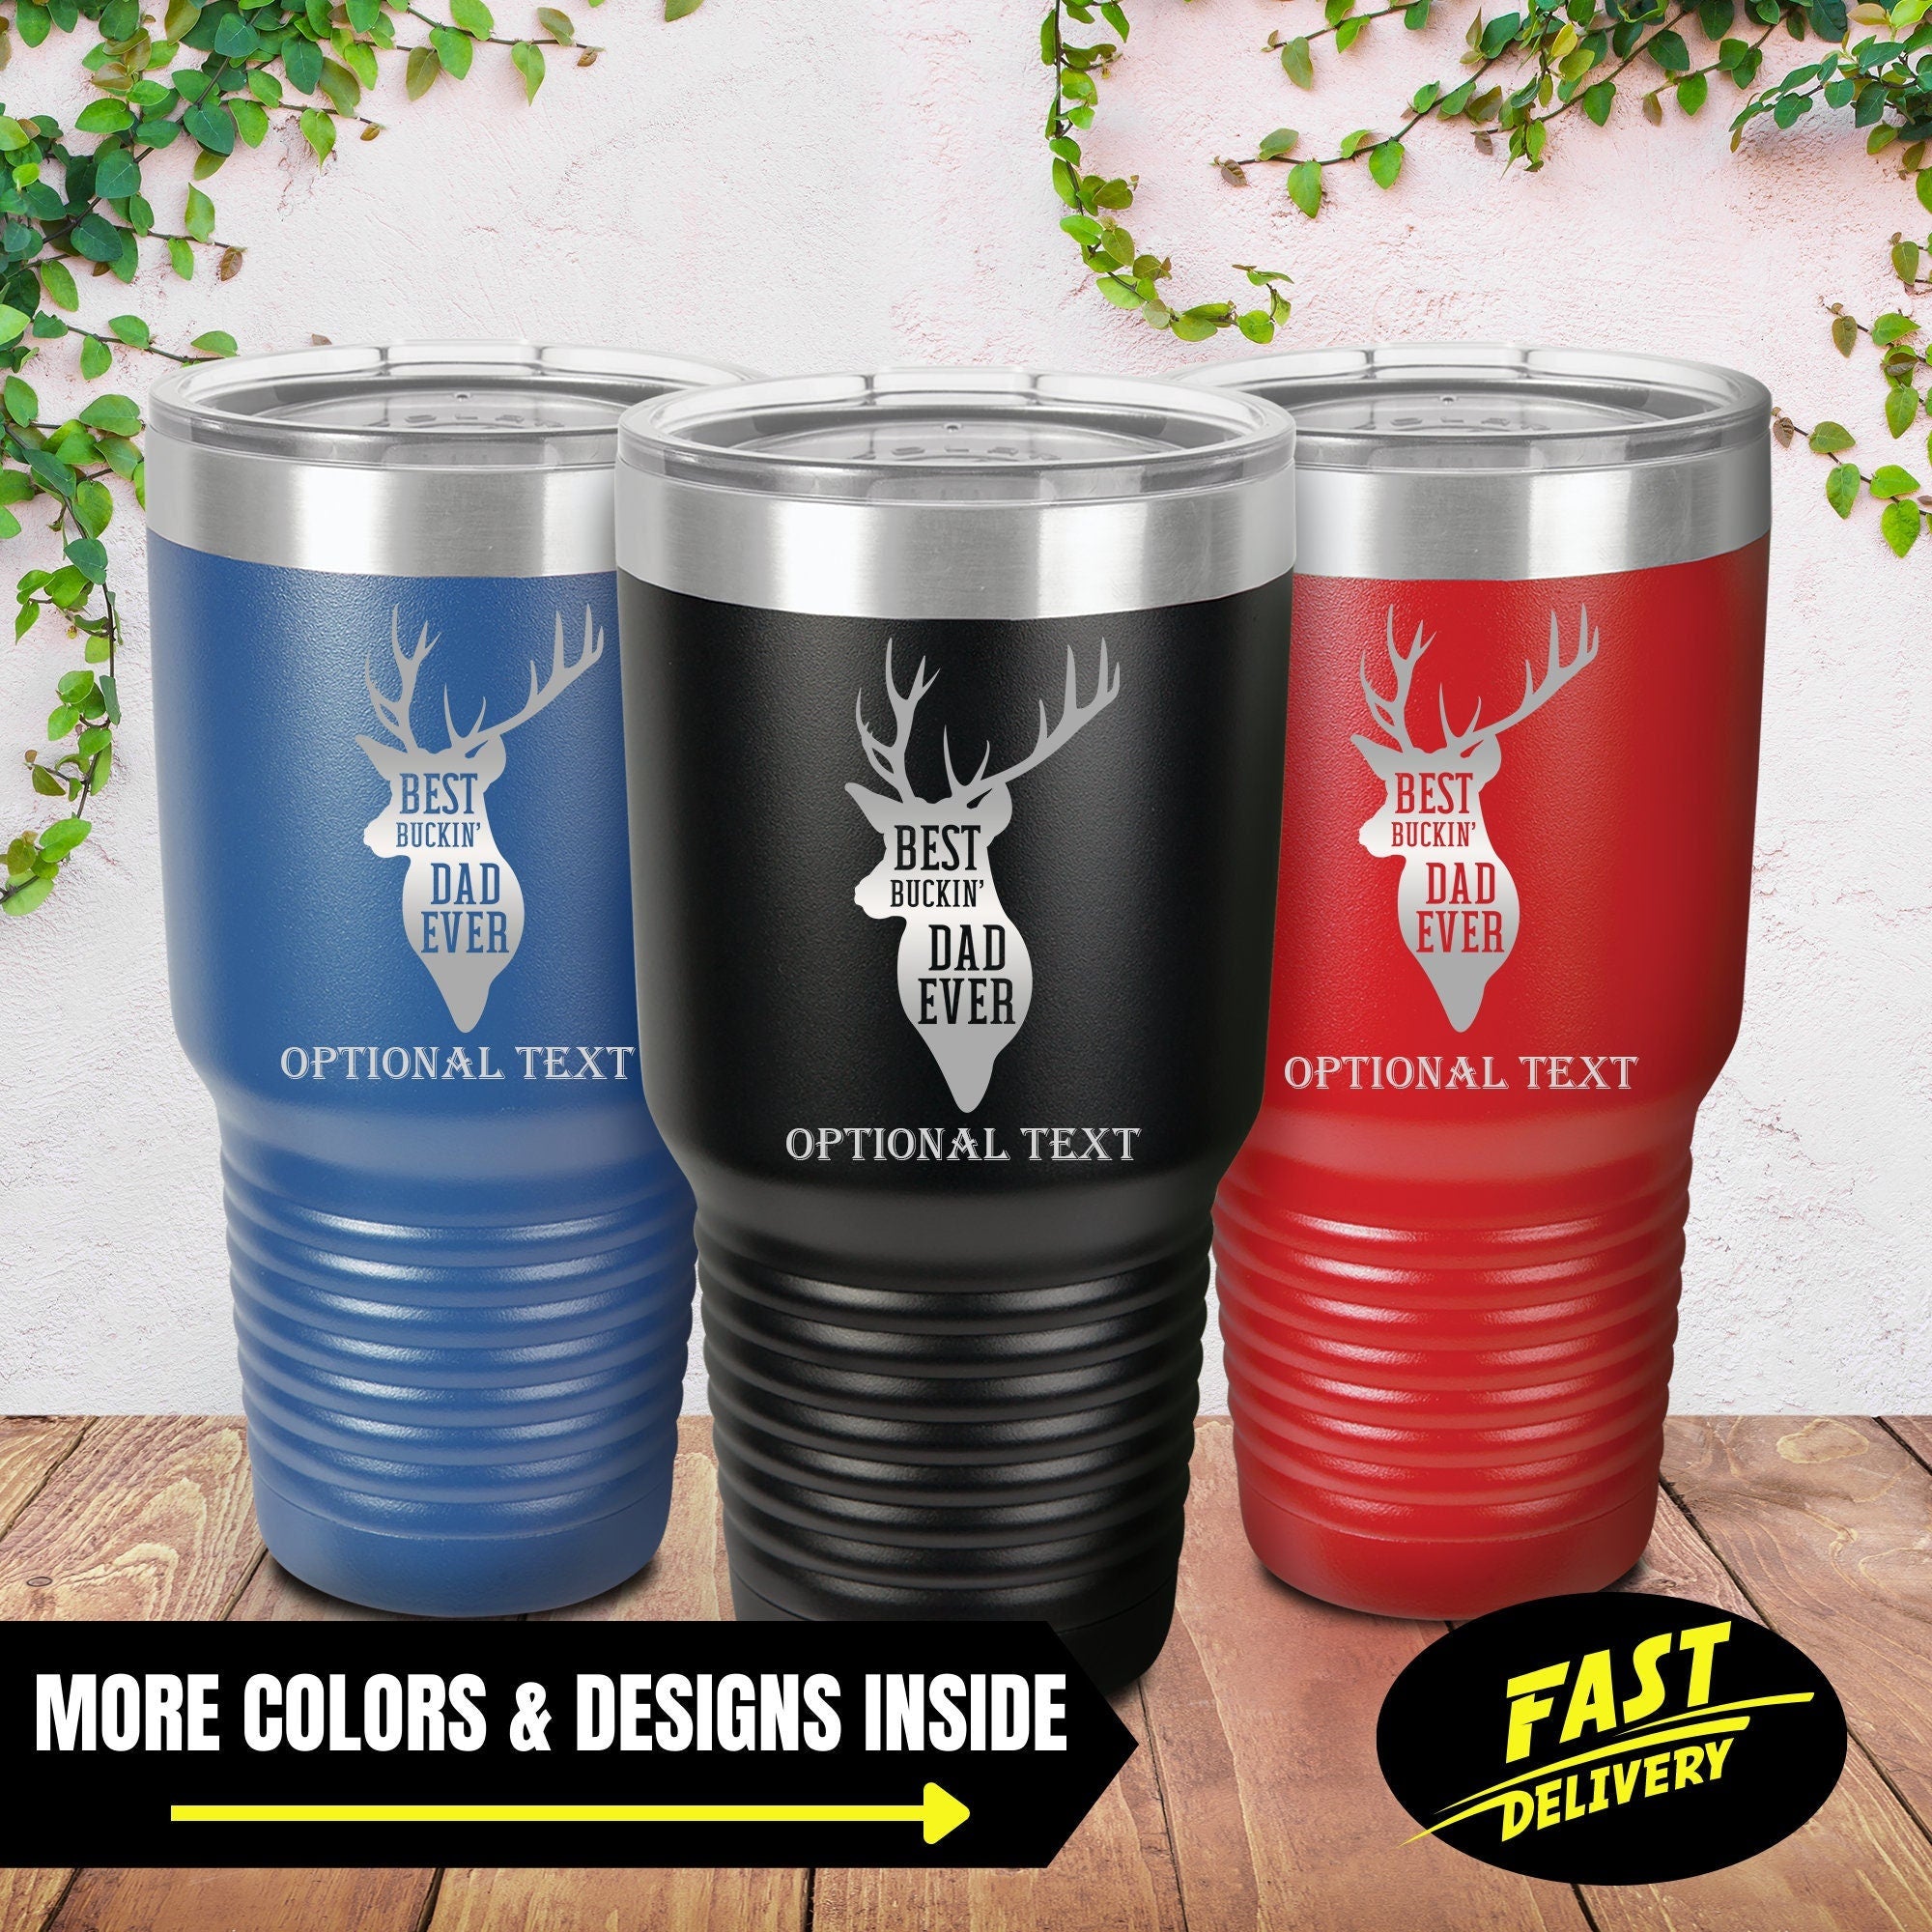 Best Buckin' Dad Ever Hunting Tumbler Gifts – Broquet